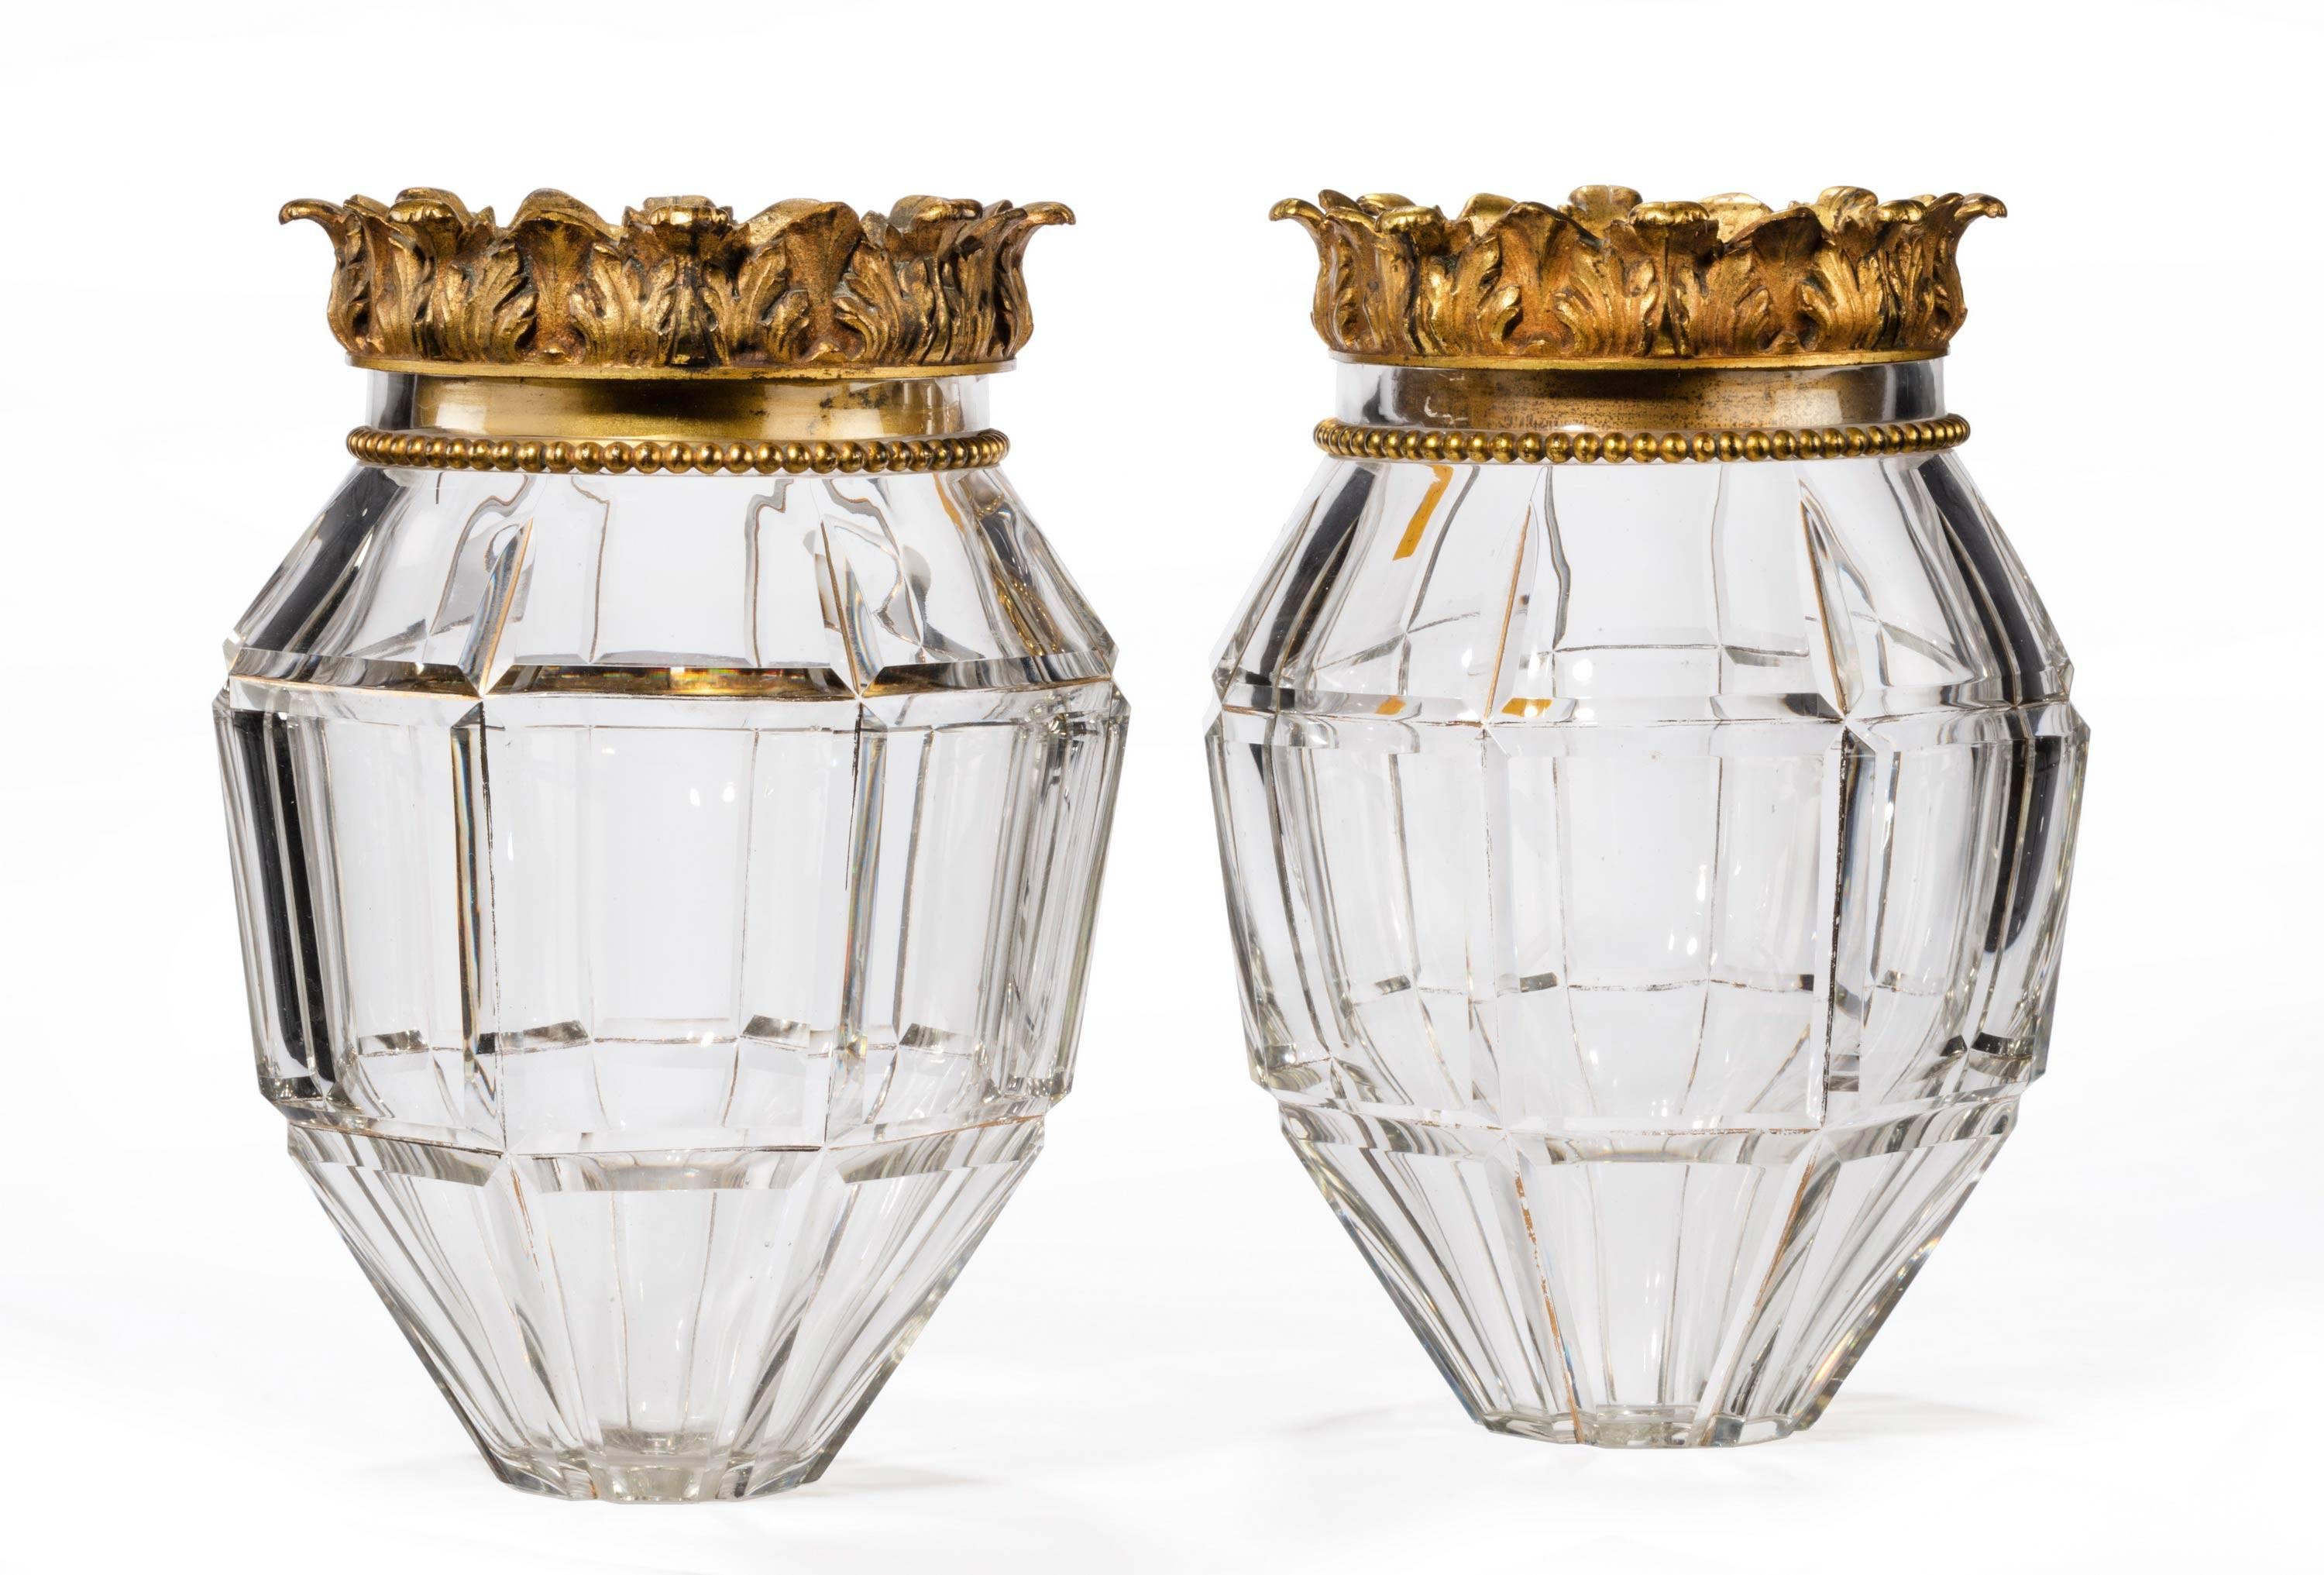 English Pair of Early 20th Century Vase Lanterns with Bevelled Edges